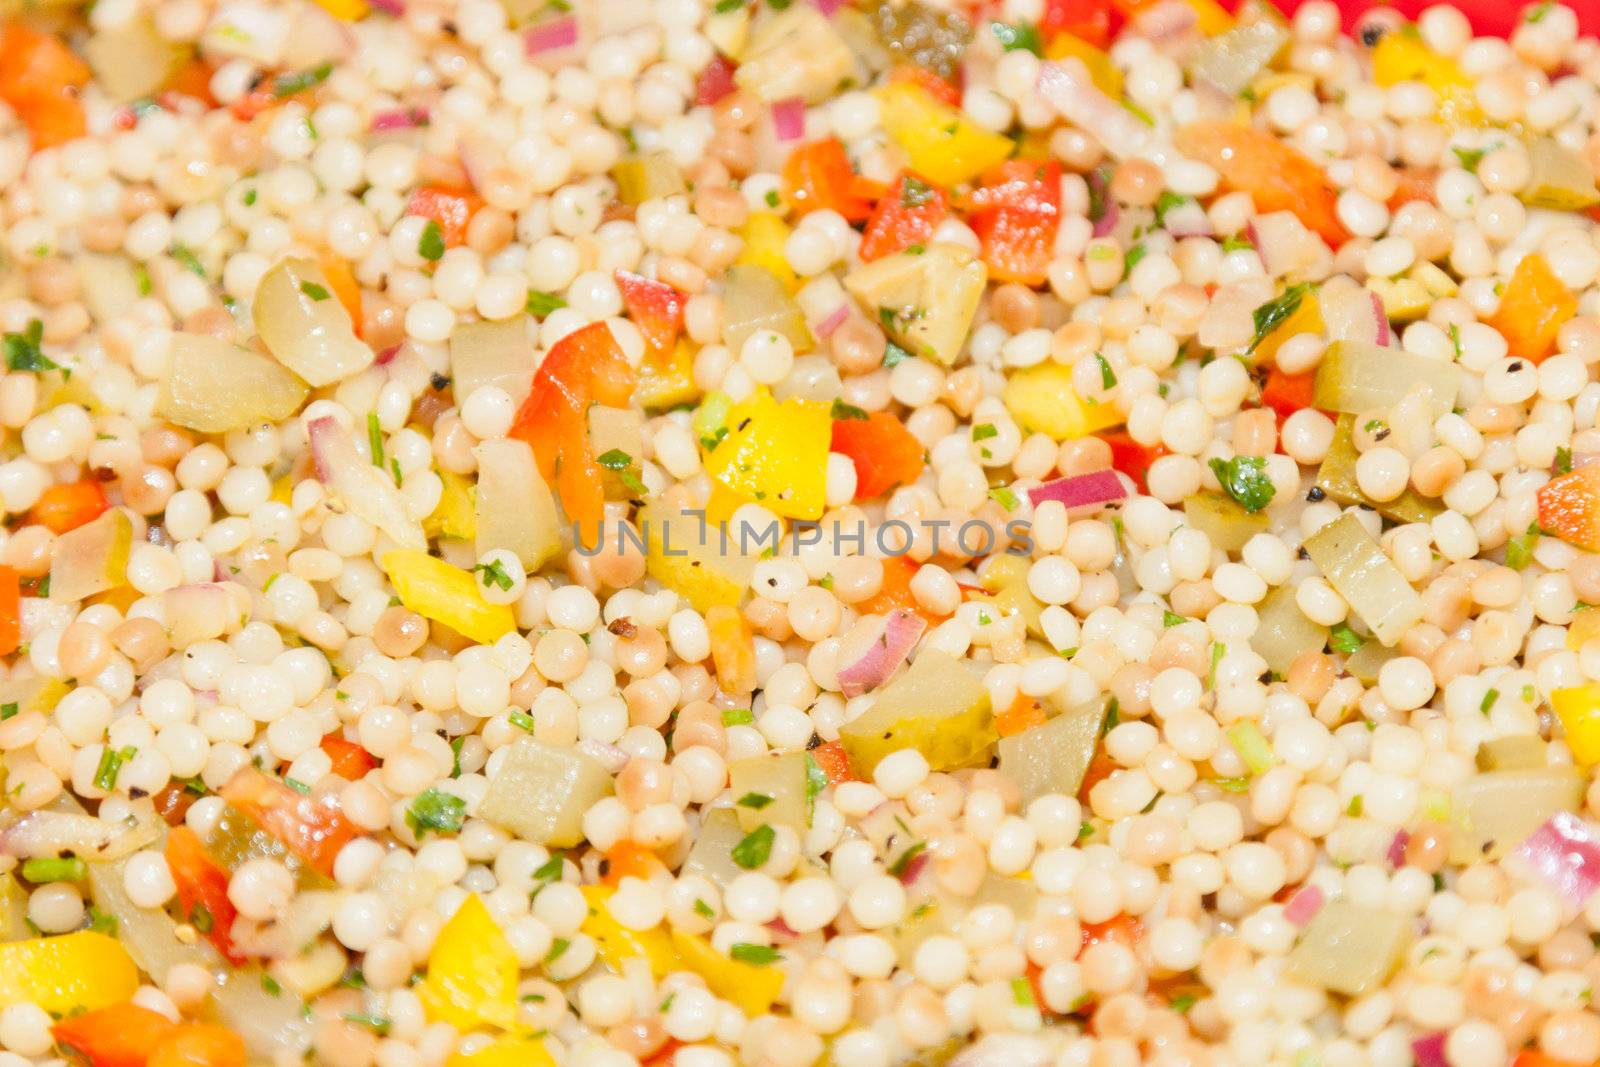 Couscous salad by melastmohican